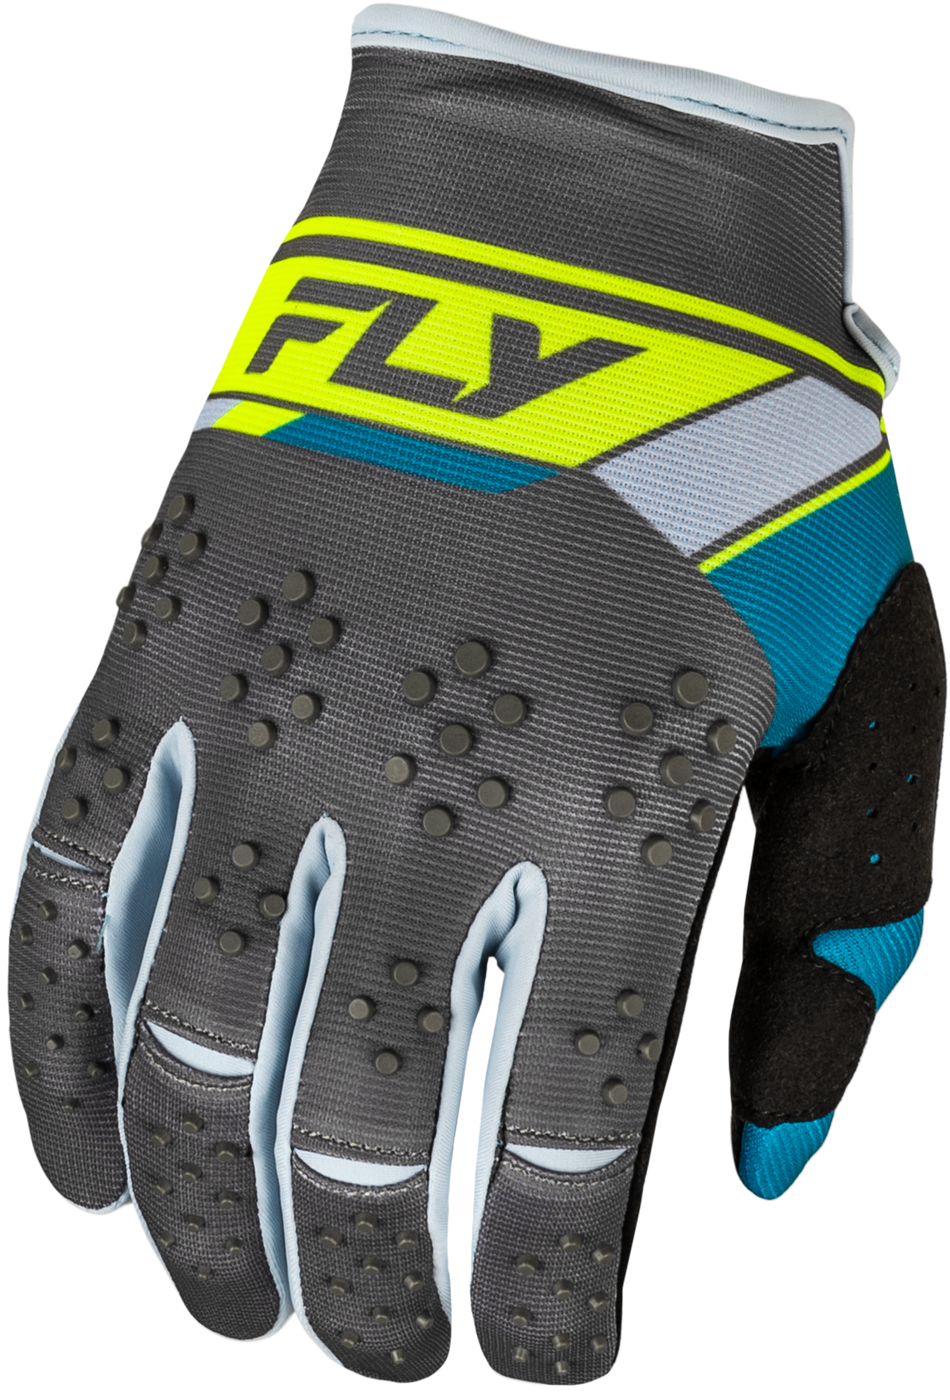 FLY RACING Youth Kinetic Prix Gloves Charcoal/Hi-Vis Ys 377-411YS